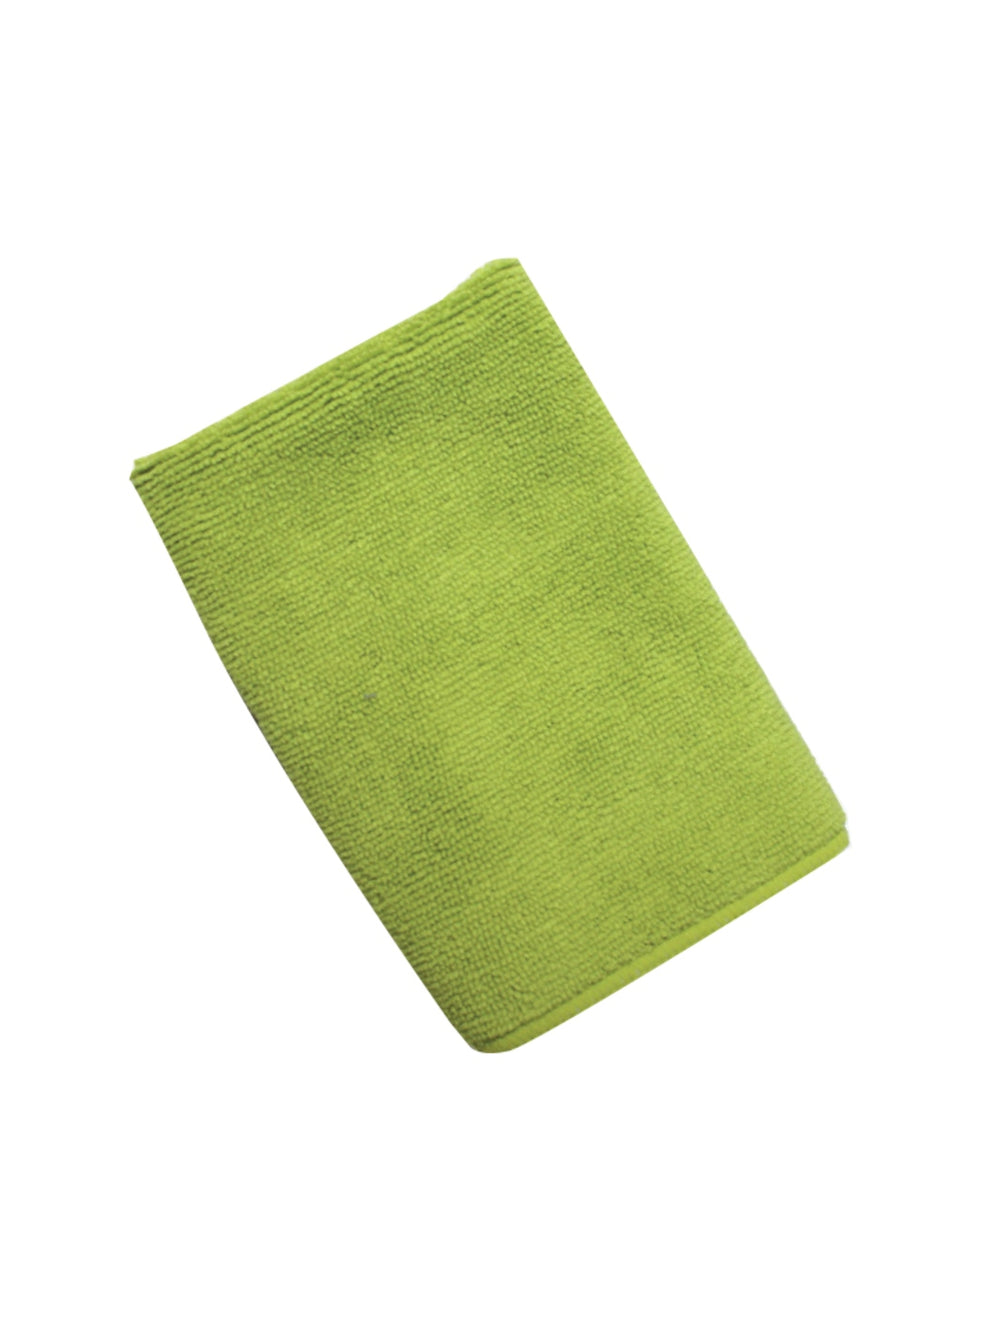 Photo of CAFETTO Cleaning Cloth ( Cleaning Cloth (30x30 cm green) ) [ Cafetto ] [ Barista Tools ]